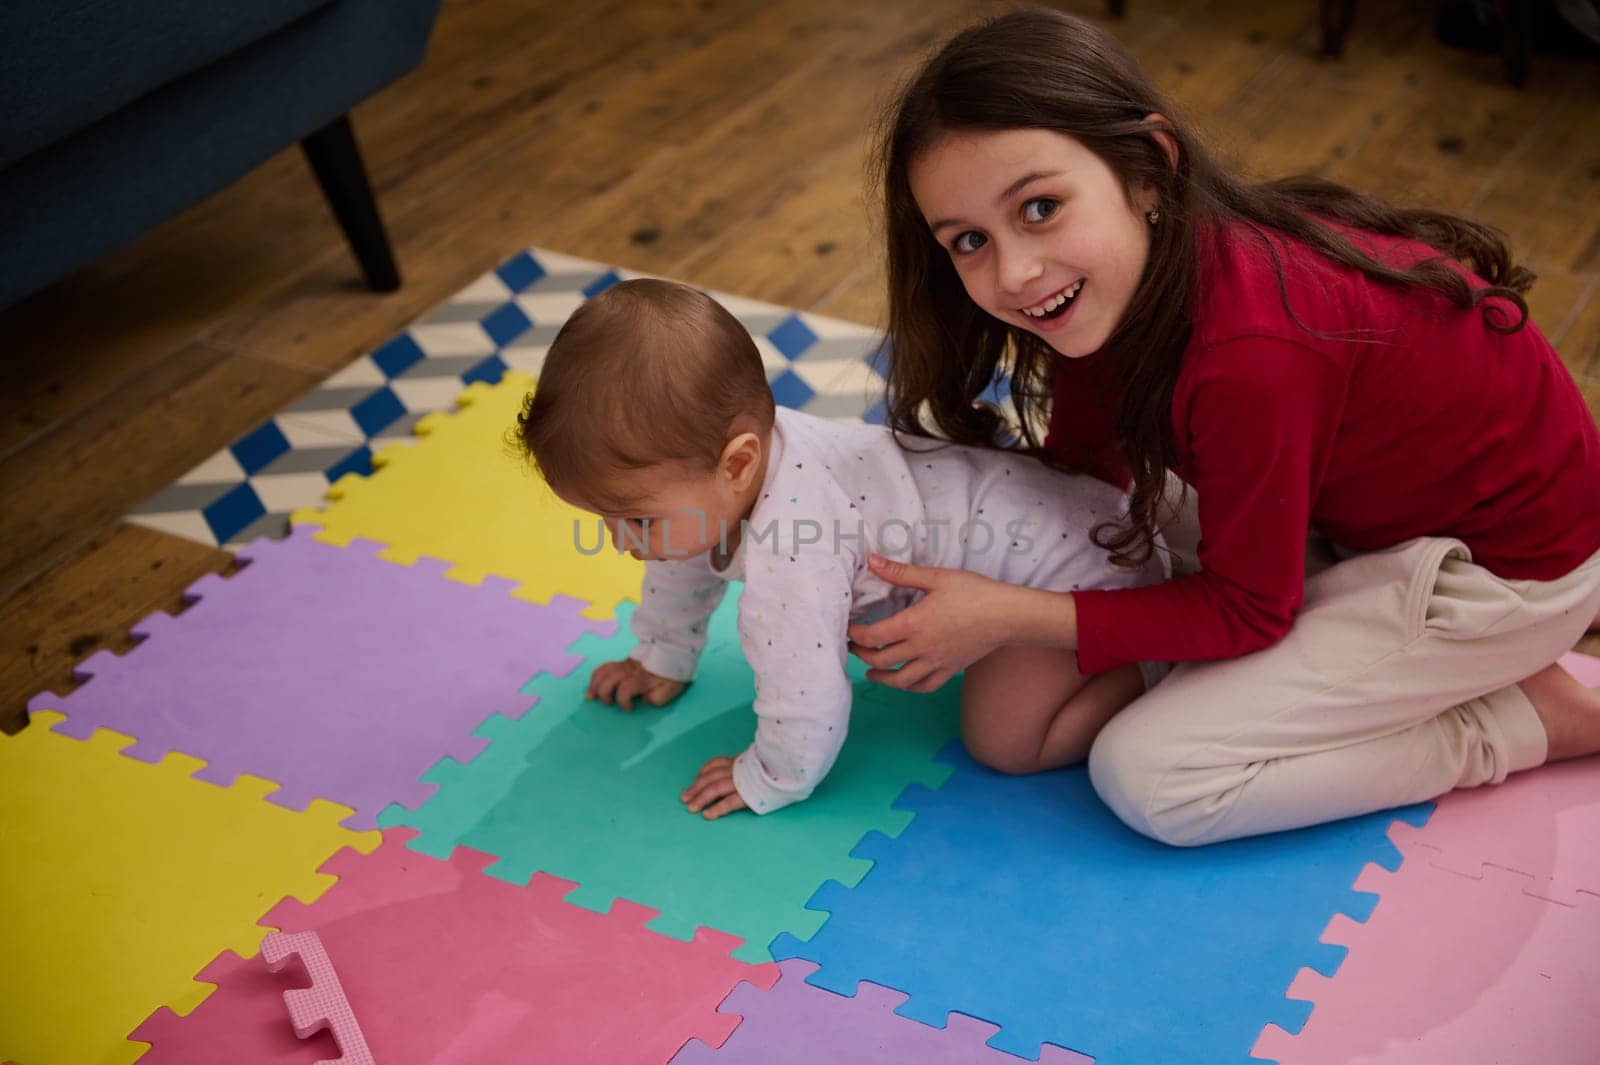 Adorable little girl smiling looking at camera, expressing positive emotions and happiness helping her brother, a cute baby boy on crawling on colorful puzzle carpet at home. Children. Growth. Family by artgf